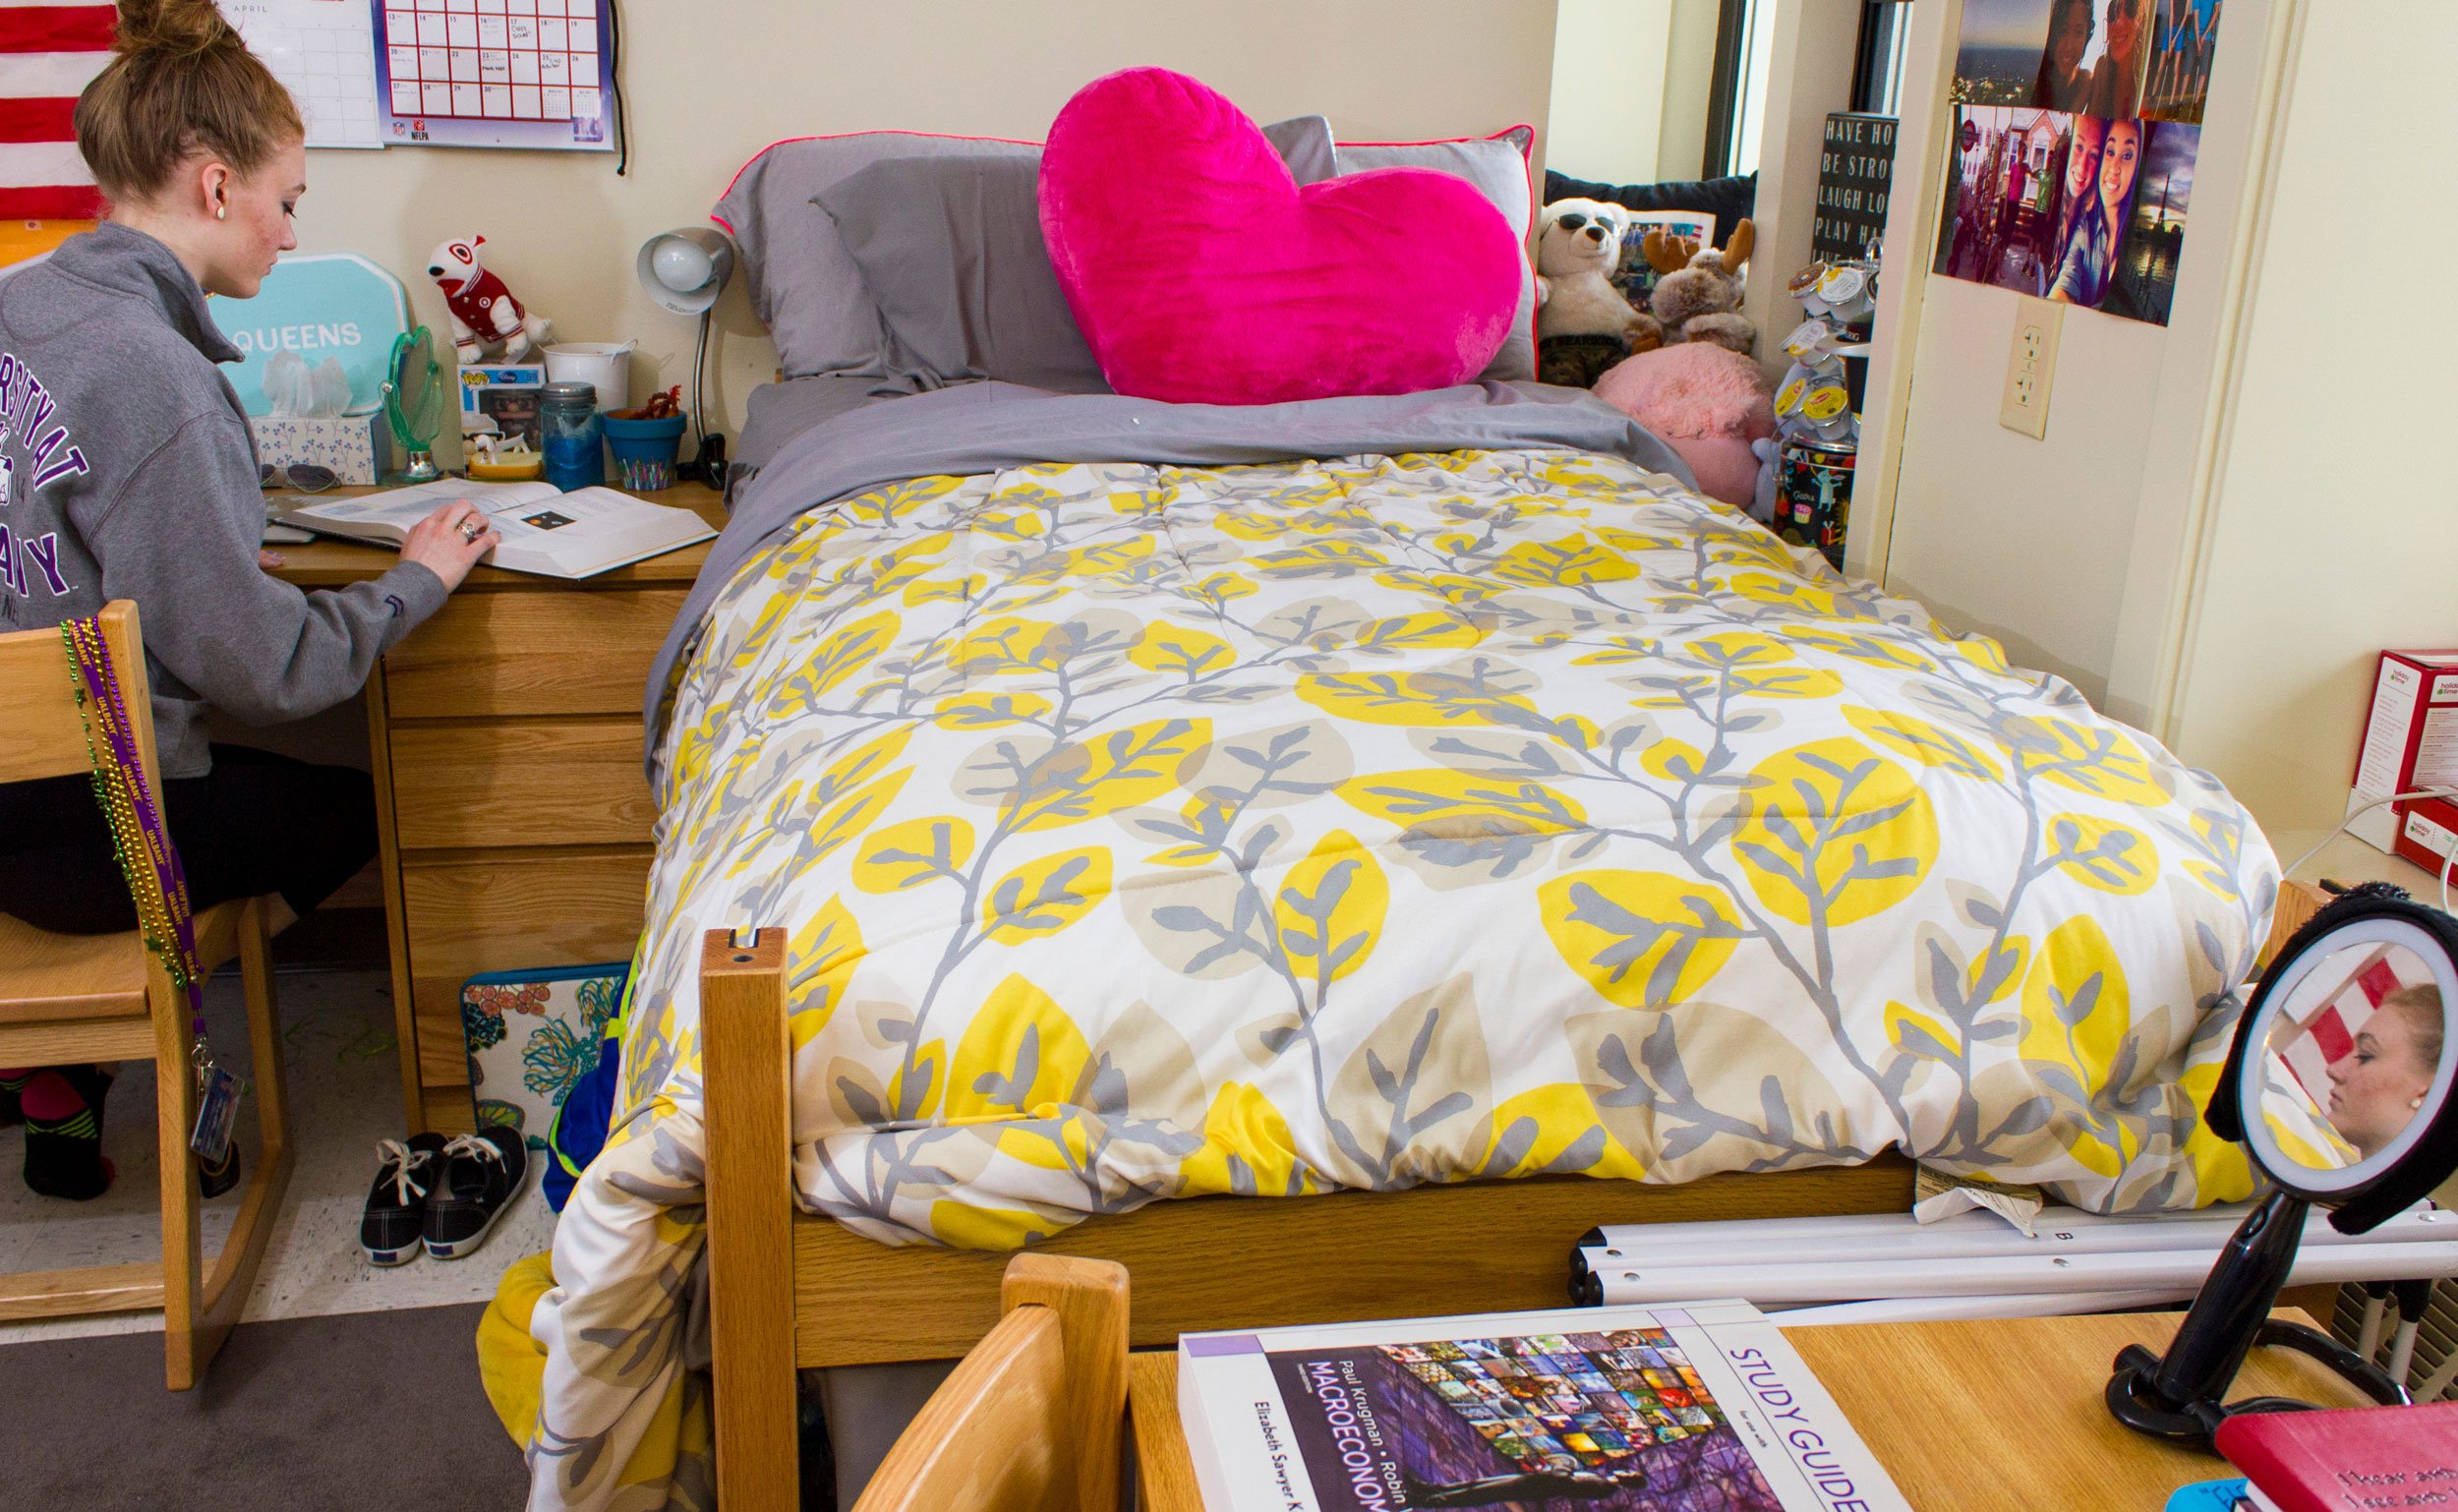 A student works at her desk inside her residence hall room, sitting beside a made bed